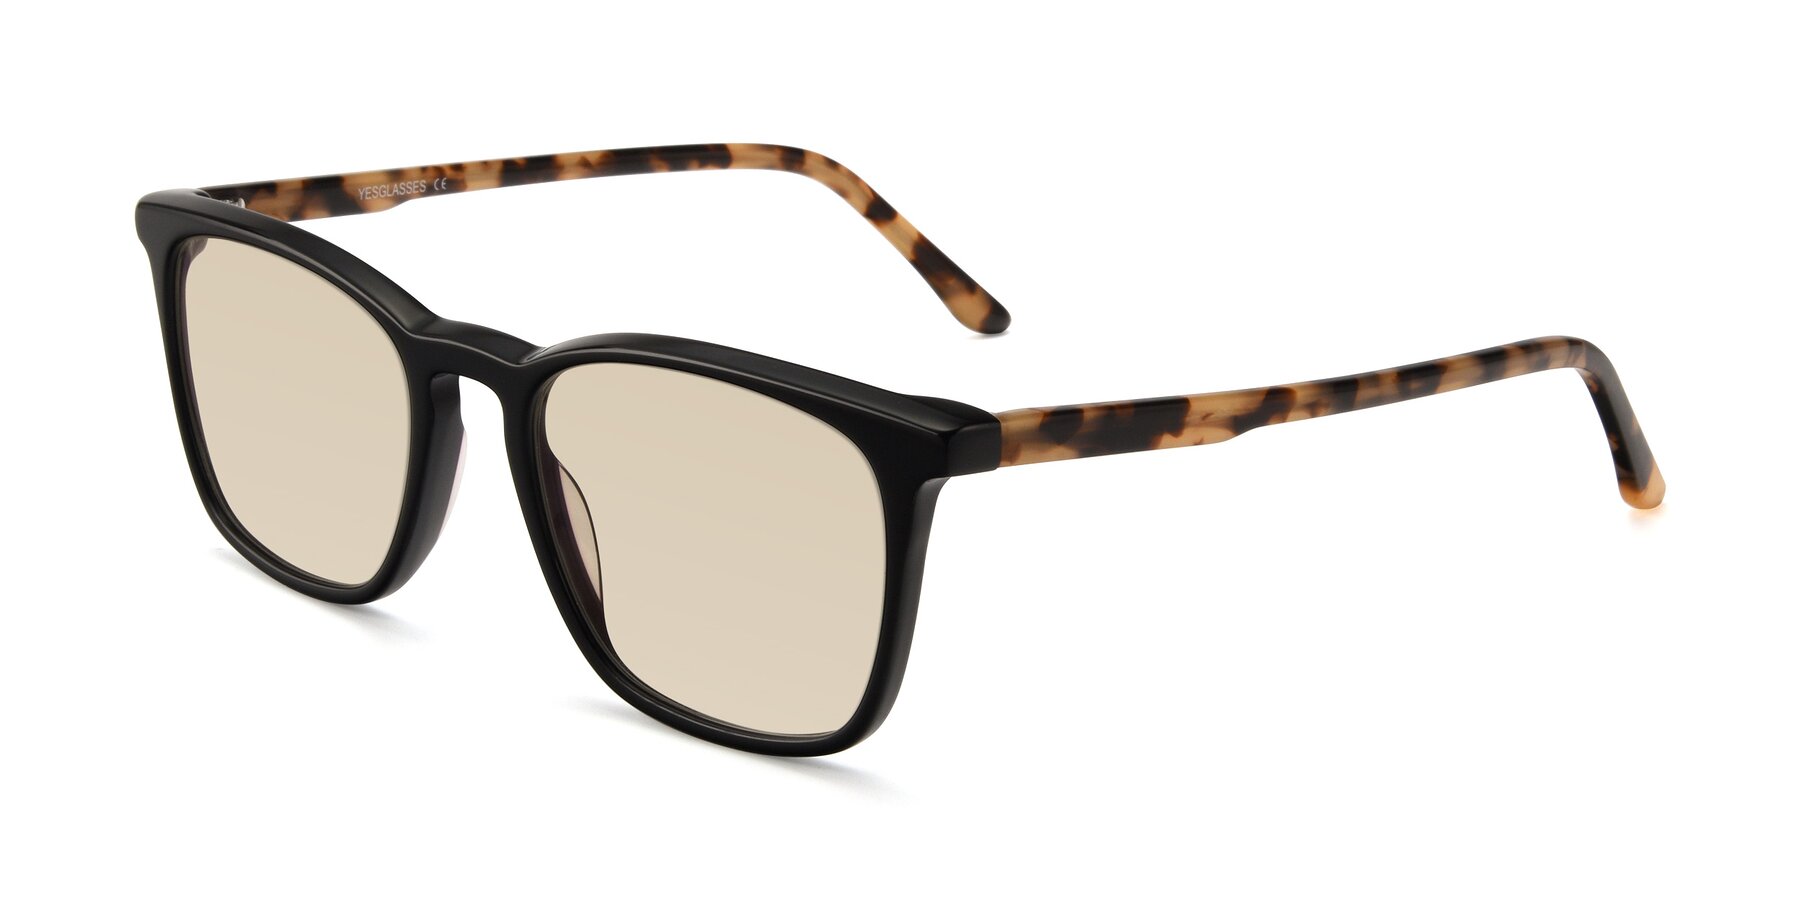 Angle of Vigor in Black-Tortoise with Light Brown Tinted Lenses